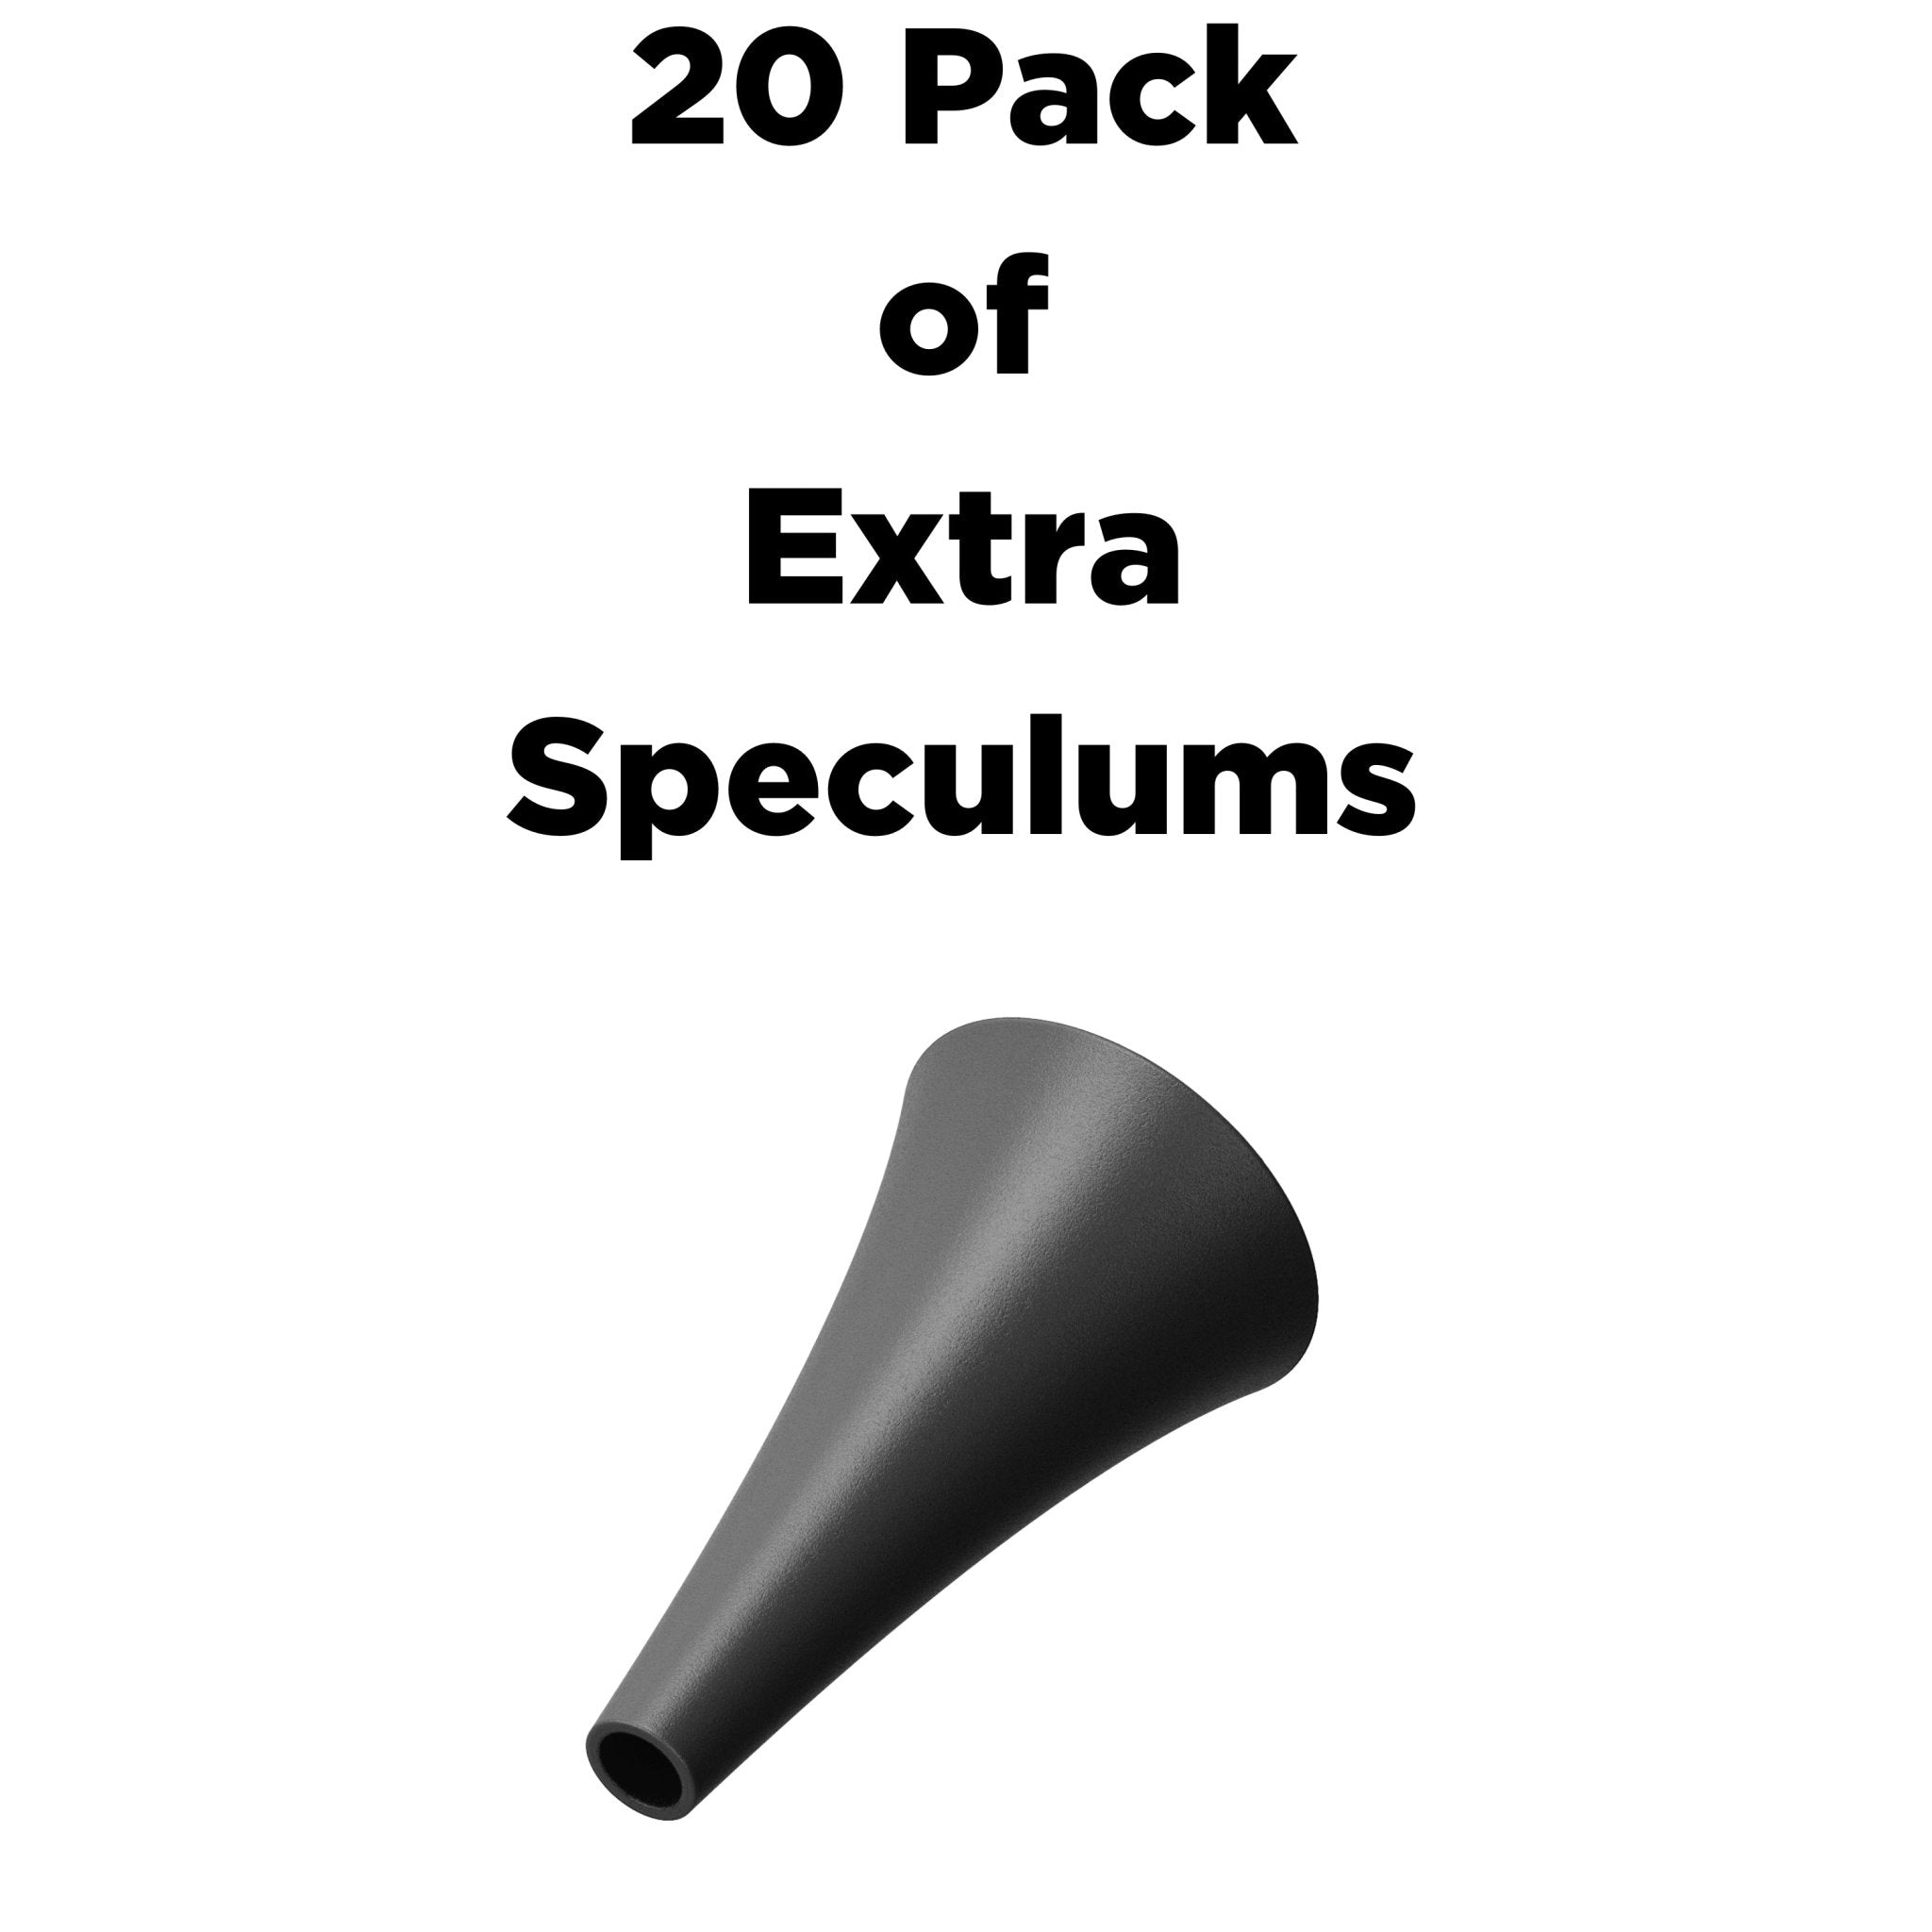 20 - Piece Speculum Set for Use with MOBI Smart Bluetooth Otoscope - Professional Grade Accessories for Ear, Nose, and Throat Examination - MOBI USA